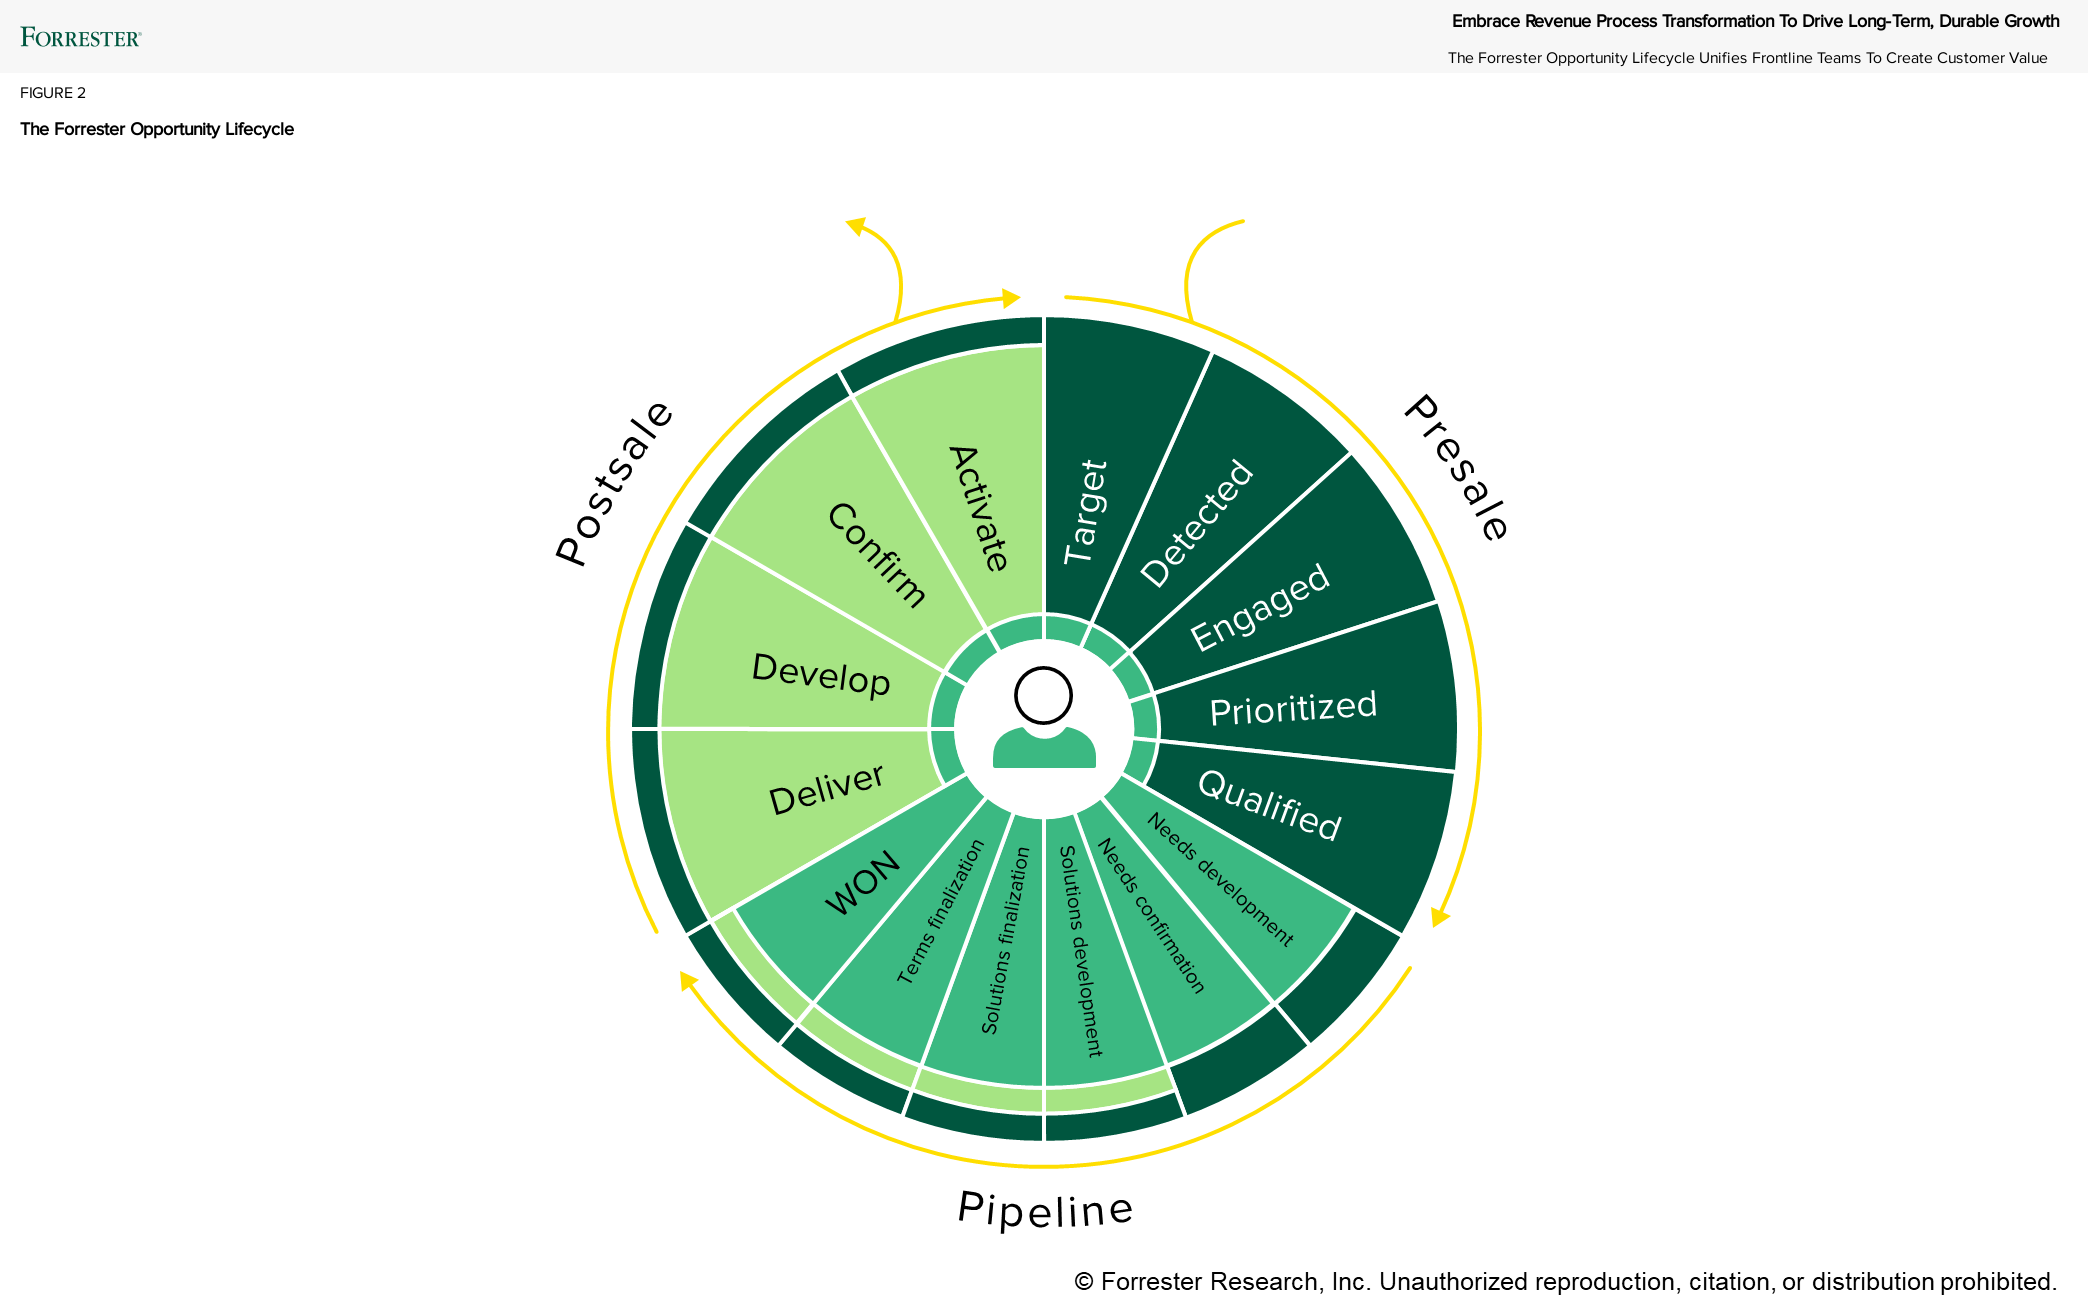 The Forrester Opportunity Lifecycle